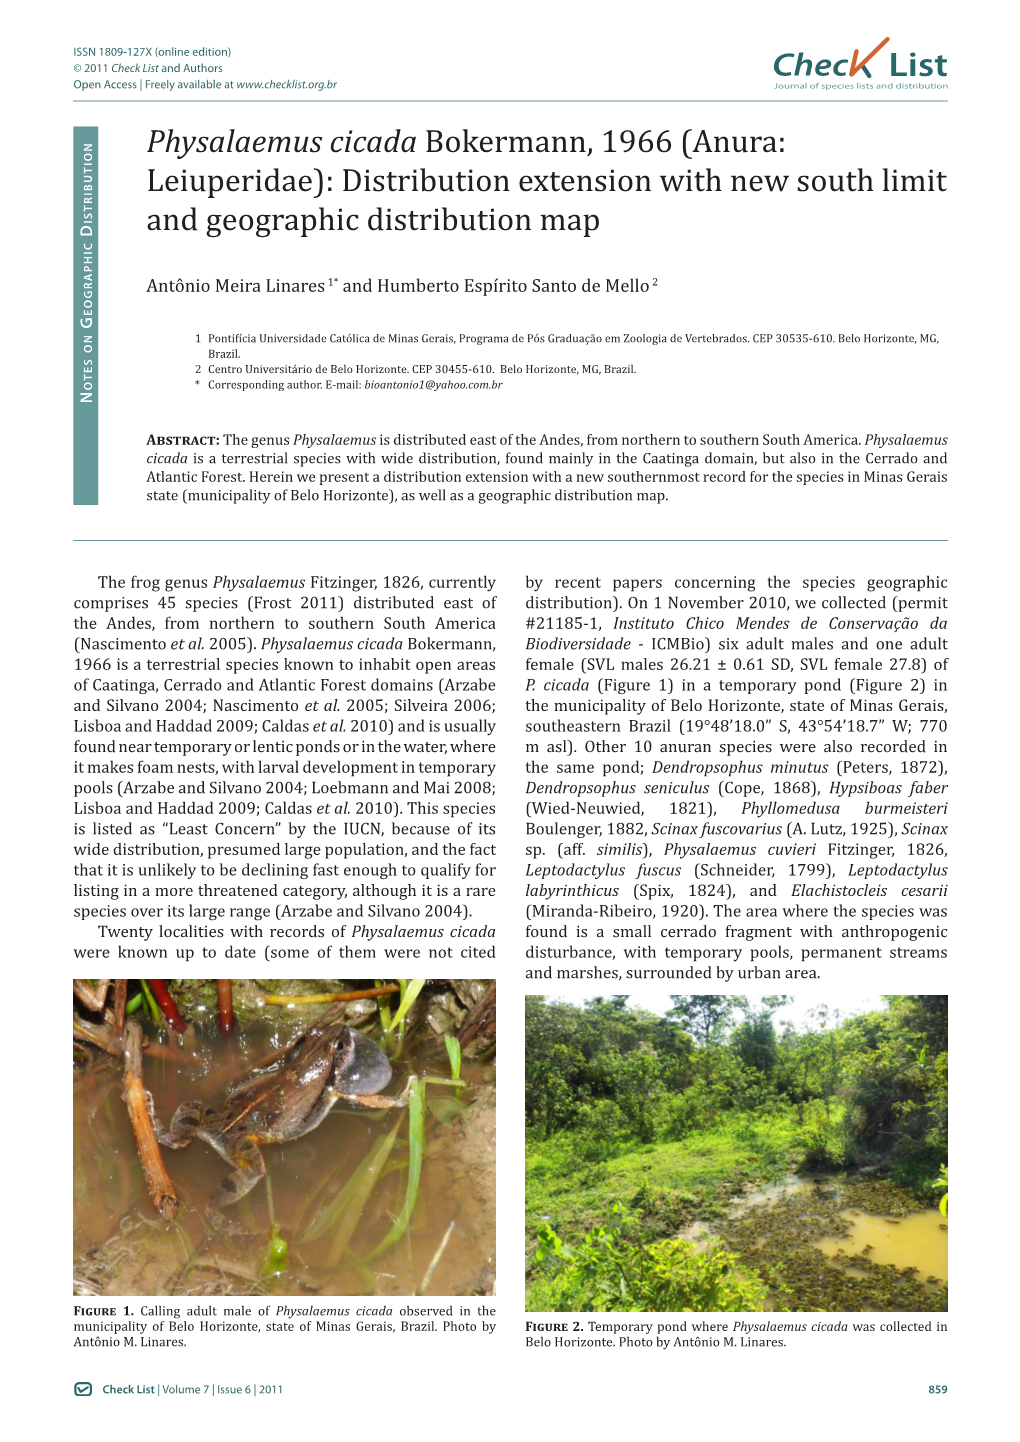 Leiuperidae): Distribution Extension with New South Limit and Geographic